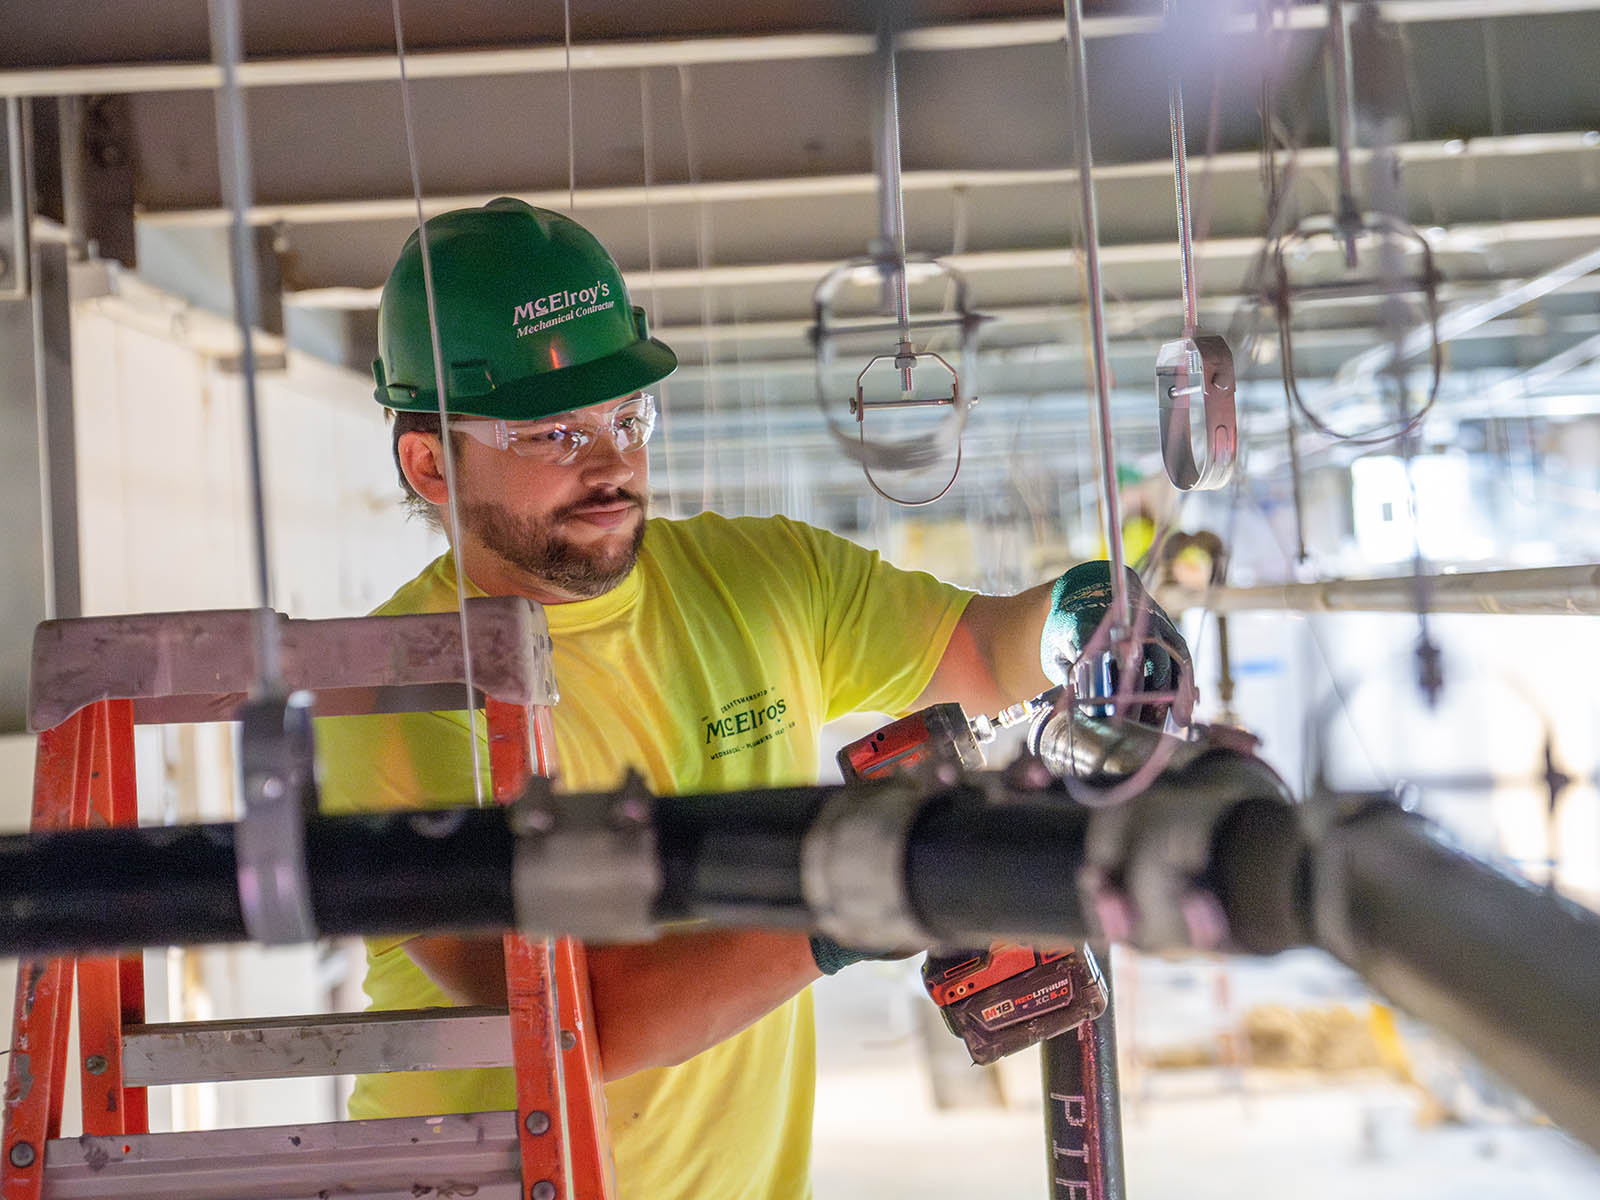 Chad Brucken, McElroy’s plumbing/pipefitting foreman, is especially trusted to lead construction of medical facility piping.